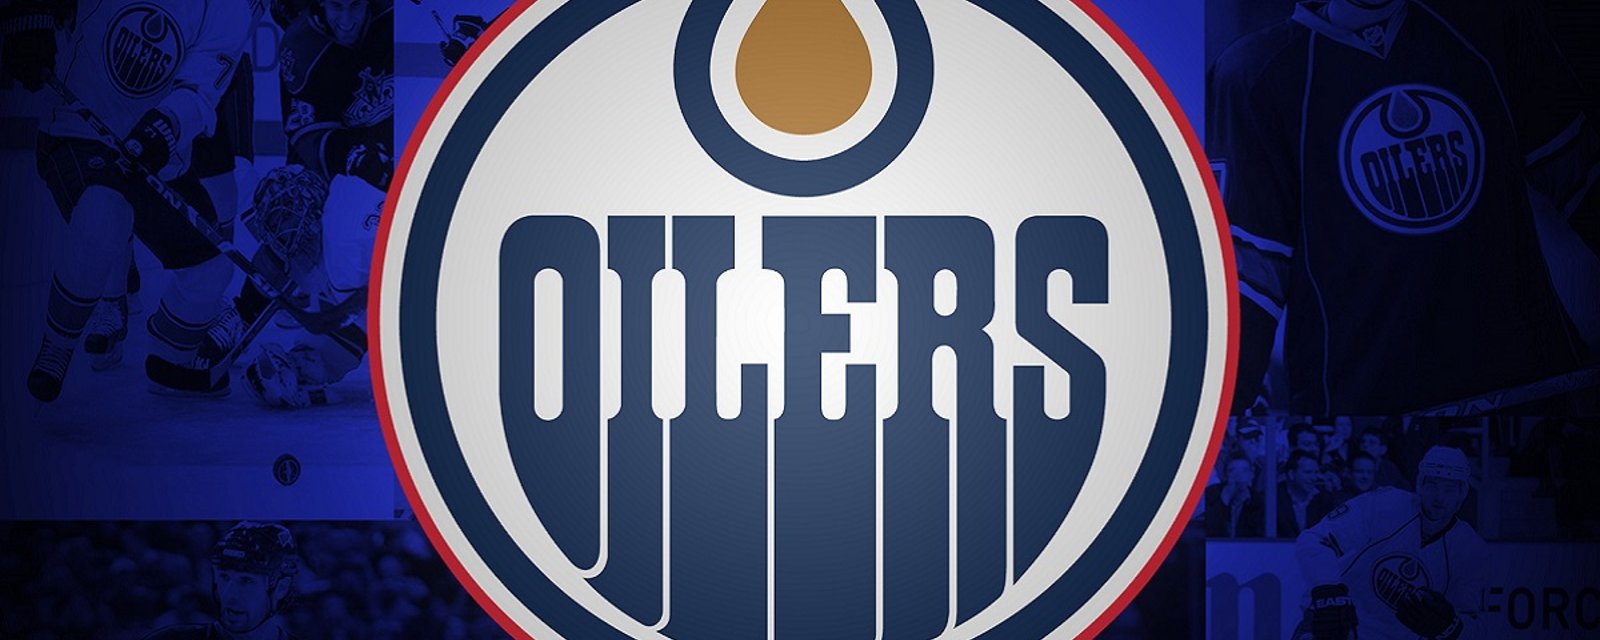 Rumor: Oilers preparing to make a huge move to improve their roster.